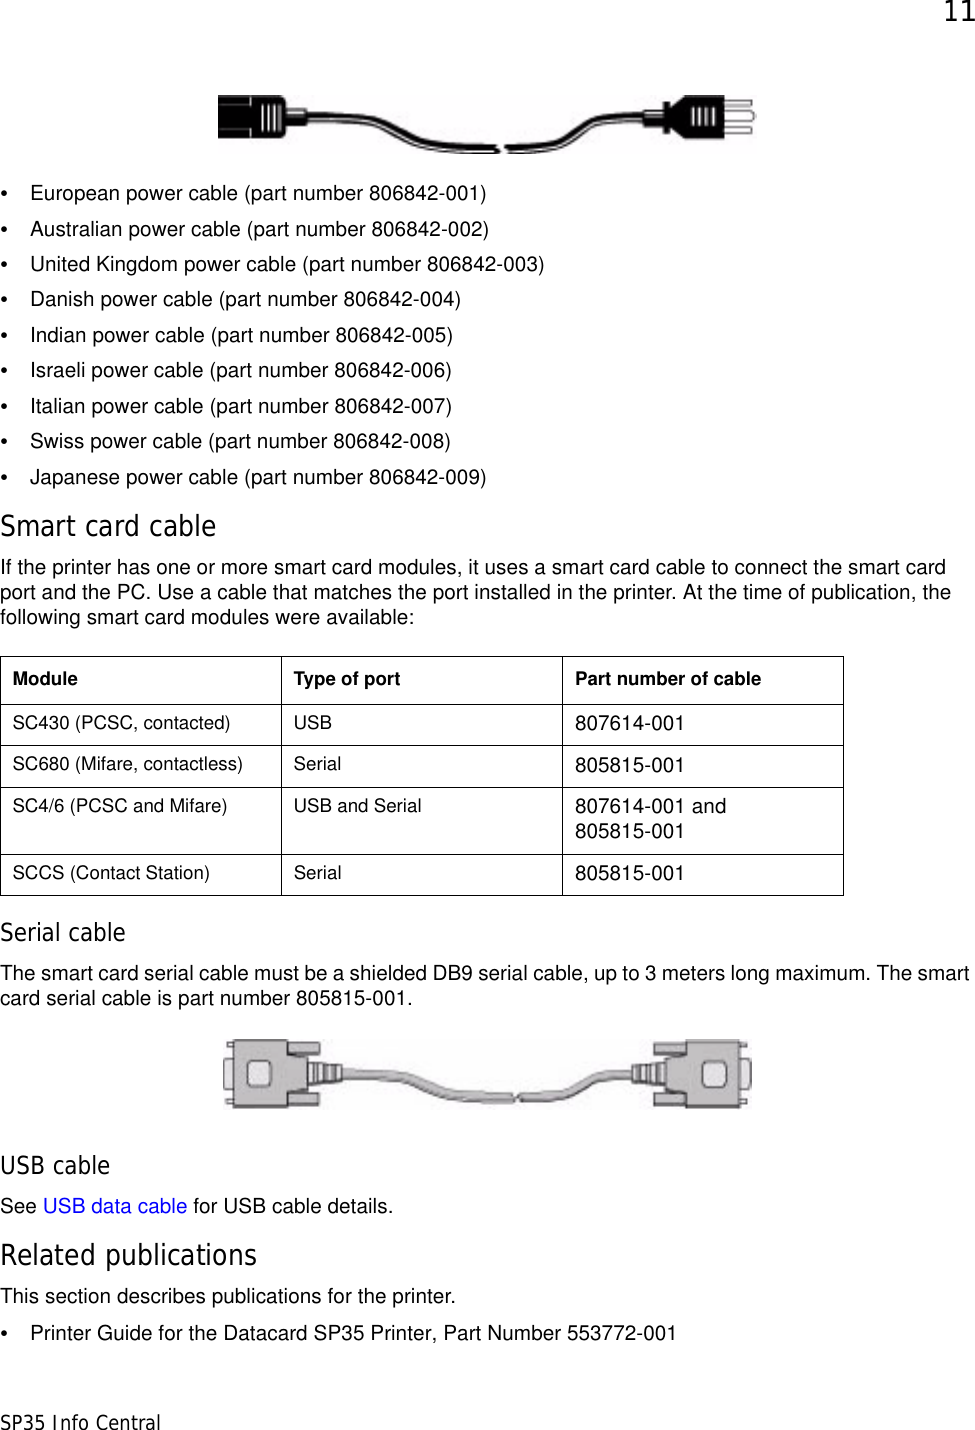 11SP35 Info Central•European power cable (part number 806842-001)•Australian power cable (part number 806842-002)•United Kingdom power cable (part number 806842-003)•Danish power cable (part number 806842-004)•Indian power cable (part number 806842-005)•Israeli power cable (part number 806842-006)•Italian power cable (part number 806842-007)•Swiss power cable (part number 806842-008)•Japanese power cable (part number 806842-009)Smart card cableIf the printer has one or more smart card modules, it uses a smart card cable to connect the smart card port and the PC. Use a cable that matches the port installed in the printer. At the time of publication, the following smart card modules were available:Serial cableThe smart card serial cable must be a shielded DB9 serial cable, up to 3 meters long maximum. The smart card serial cable is part number 805815-001. USB cableSee USB data cable for USB cable details.Related publicationsThis section describes publications for the printer.•Printer Guide for the Datacard SP35 Printer, Part Number 553772-001Module Type of port Part number of cableSC430 (PCSC, contacted) USB 807614-001SC680 (Mifare, contactless) Serial 805815-001SC4/6 (PCSC and Mifare) USB and Serial 807614-001 and 805815-001SCCS (Contact Station) Serial 805815-001